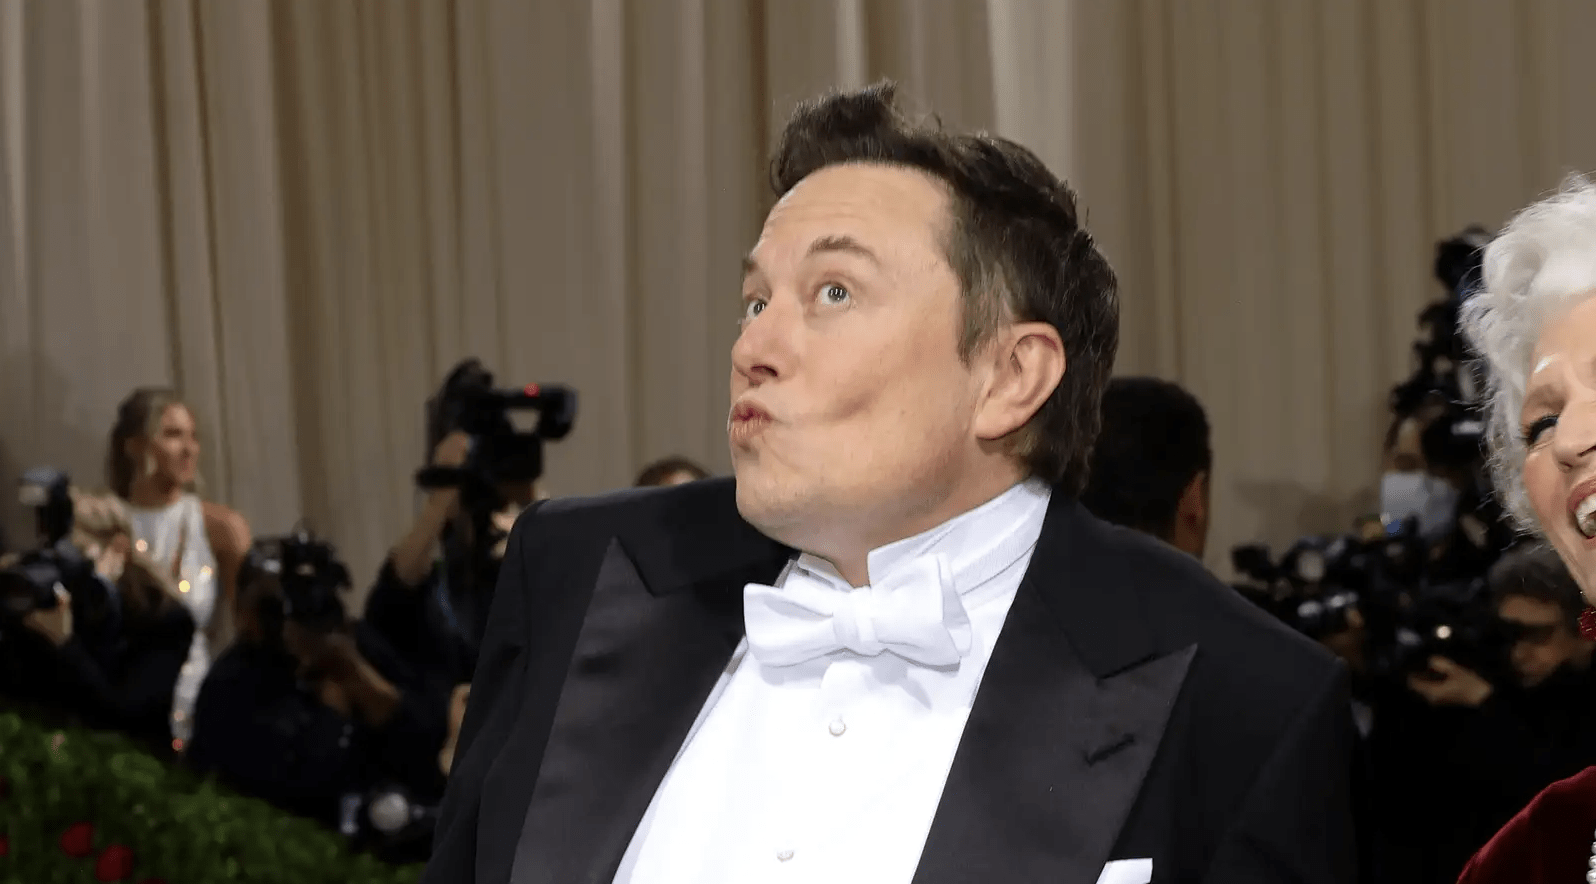 Musk, Tesla and SpaceX Had a Hell of a Year